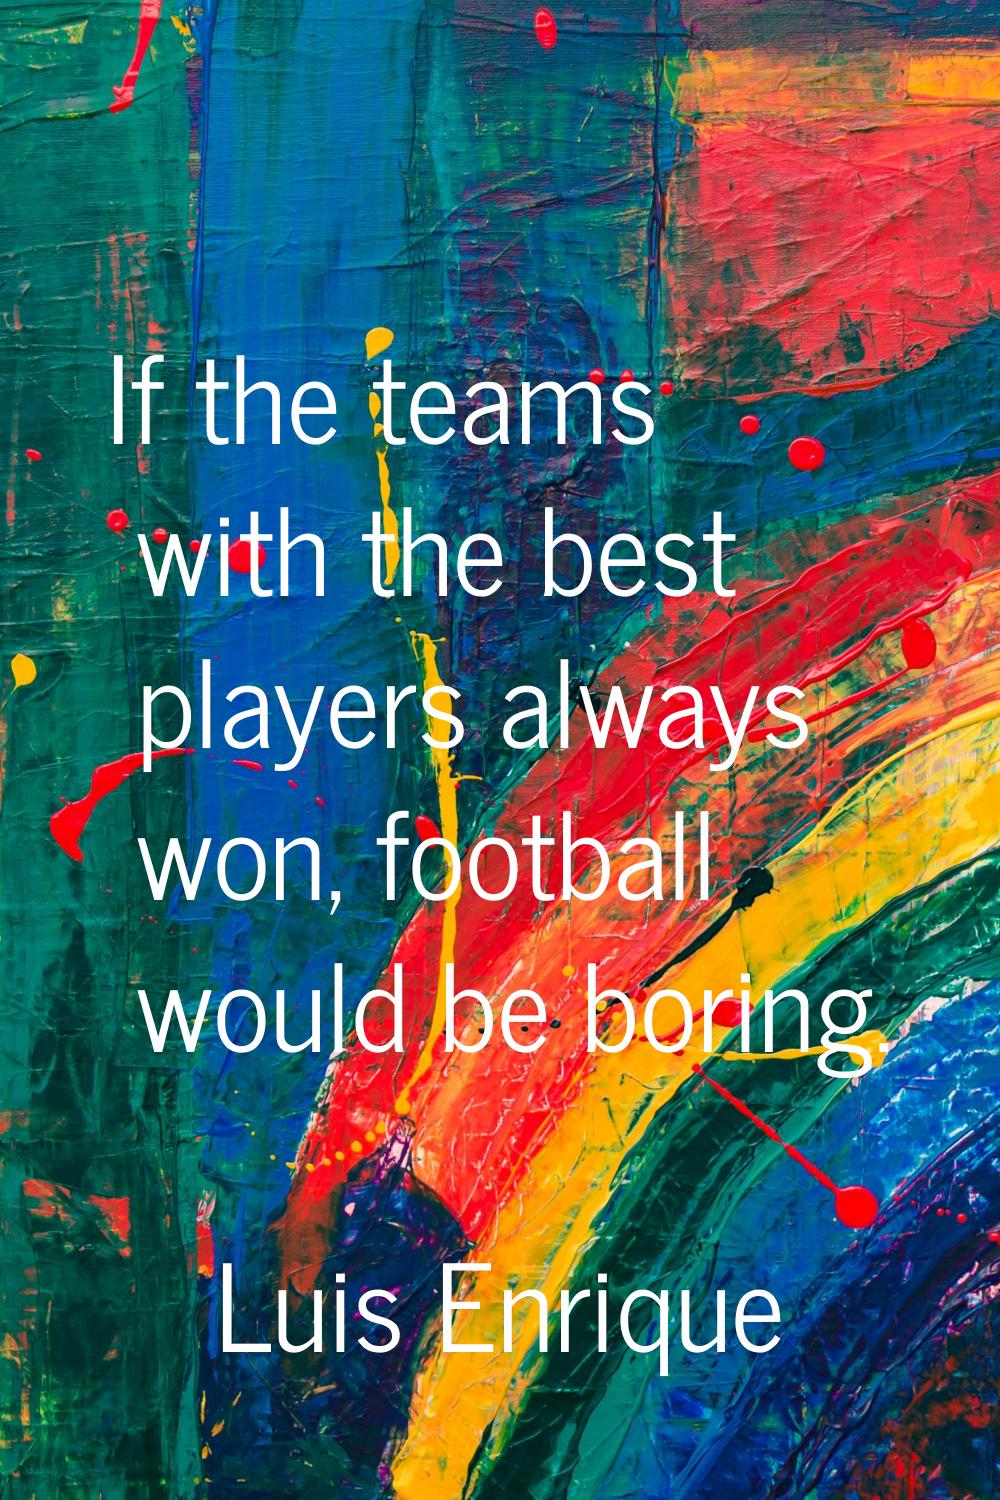 If the teams with the best players always won, football would be boring.